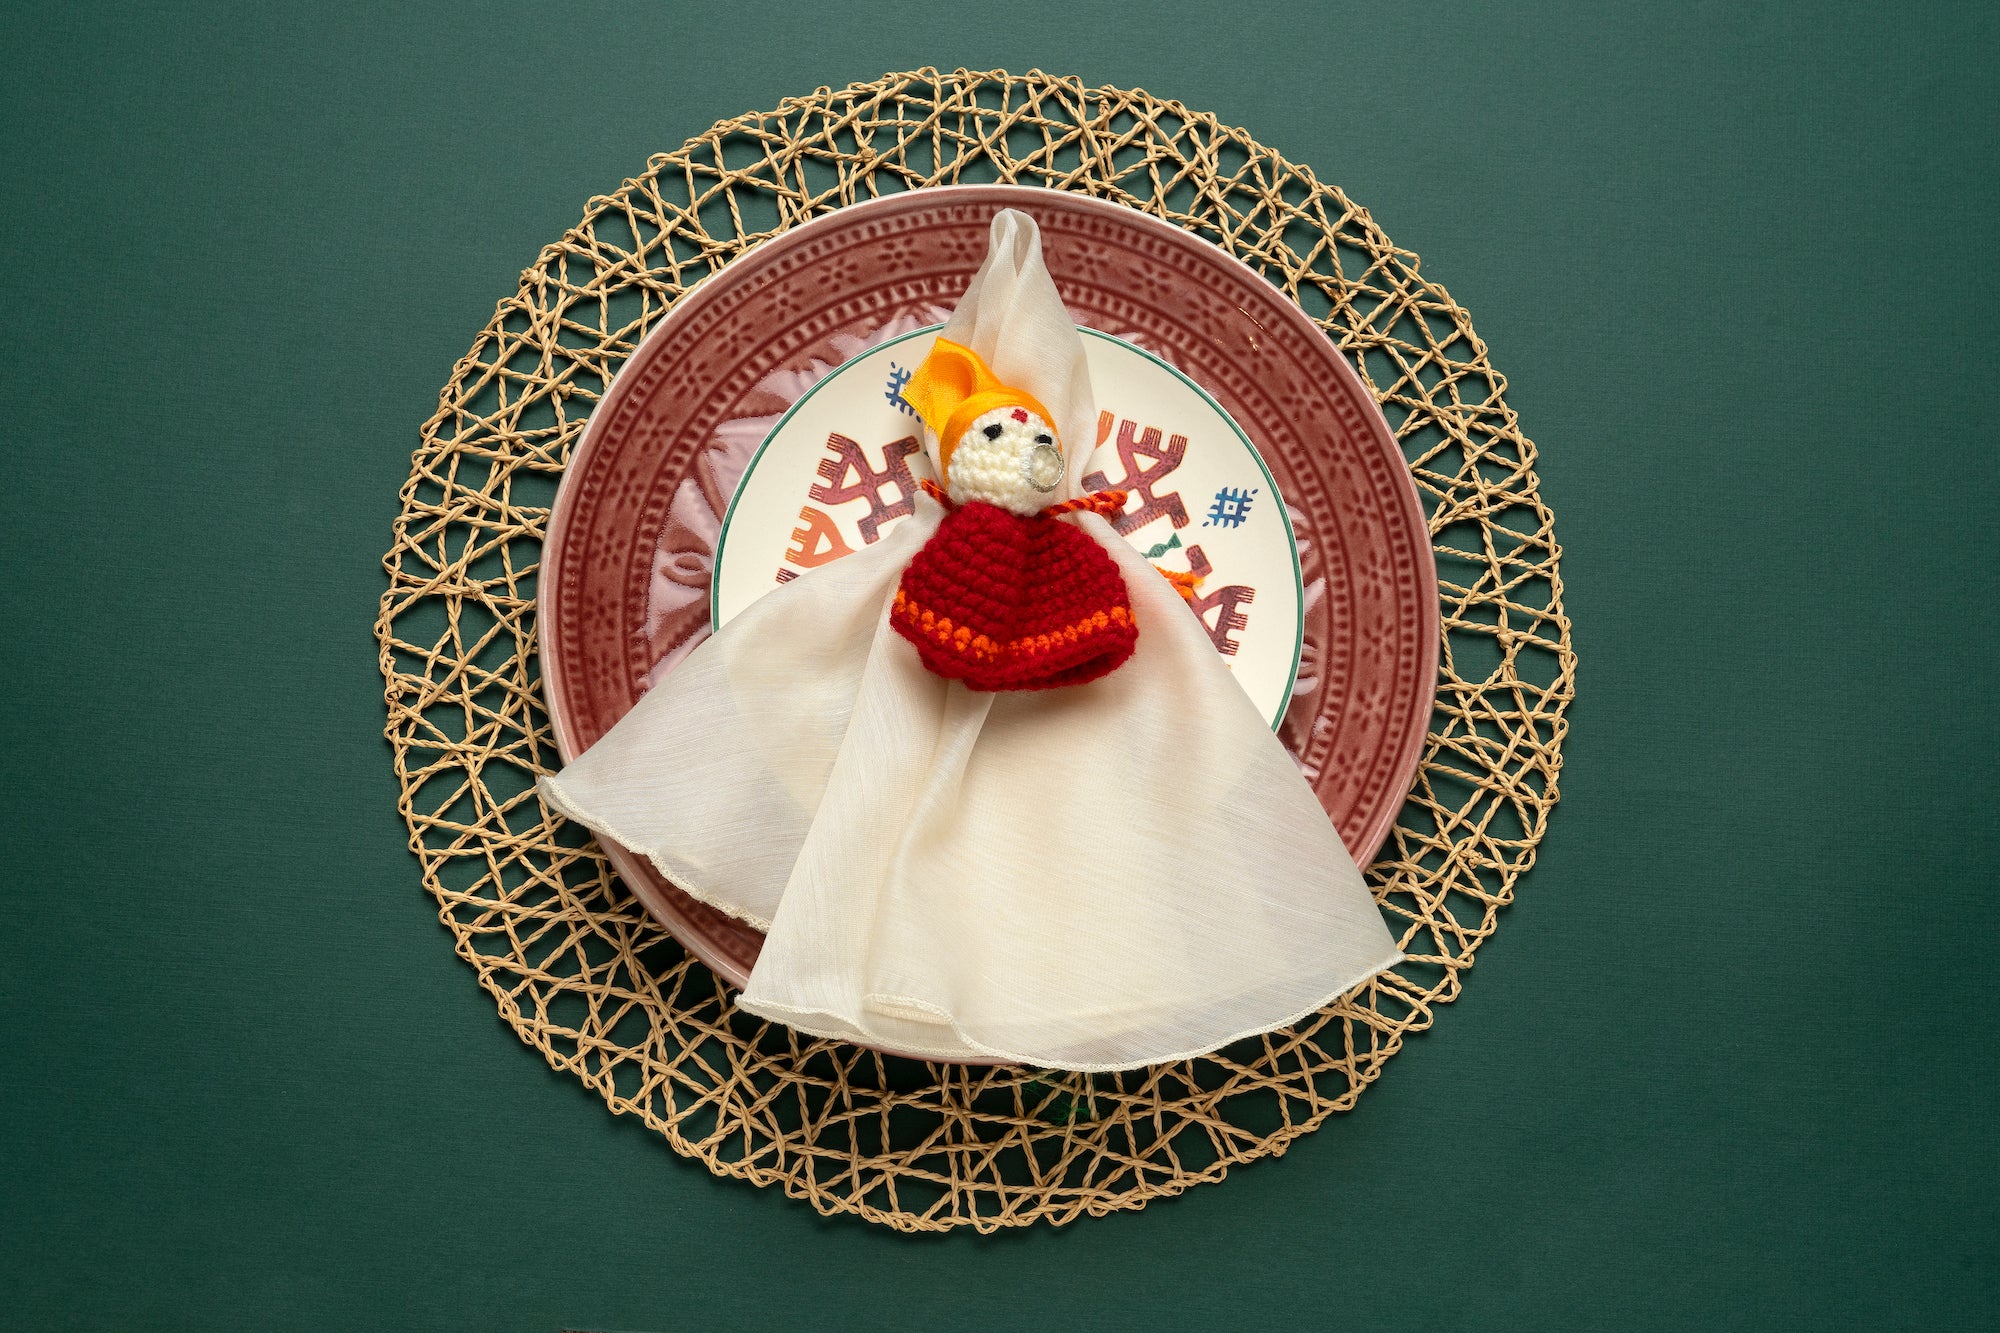 Doll Tie-Up Napkin Rings